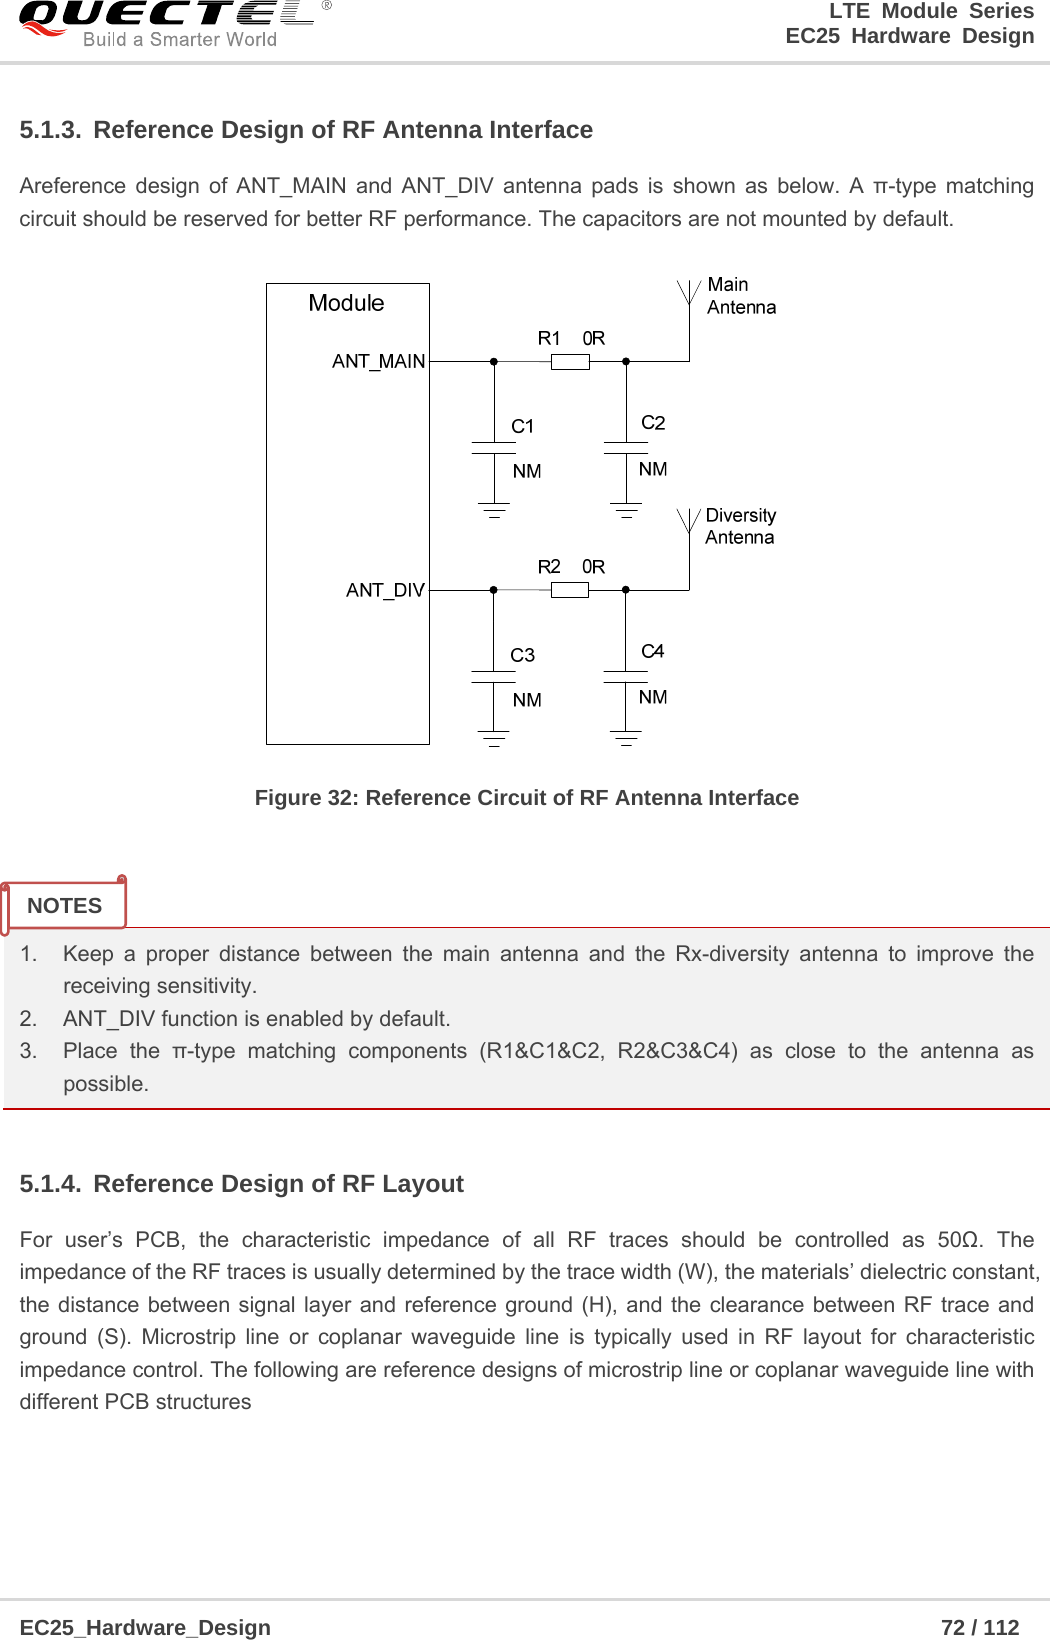 LTE Module Series                                                  EC25 Hardware Design  EC25_Hardware_Design                                                             72 / 112    5.1.3.  Reference Design of RF Antenna Interface Areference design of ANT_MAIN and ANT_DIV antenna pads is shown as below. A π-type matching circuit should be reserved for better RF performance. The capacitors are not mounted by default.  Figure 32: Reference Circuit of RF Antenna Interface   1.  Keep a proper distance between the main antenna and the Rx-diversity antenna to improve the receiving sensitivity. 2. ANT_DIV function is enabled by default. 3.  Place the π-type matching components (R1&amp;C1&amp;C2, R2&amp;C3&amp;C4) as close to the antenna as possible.  5.1.4.  Reference Design of RF Layout For user’s PCB, the characteristic impedance of all RF traces should be controlled as 50Ω. The impedance of the RF traces is usually determined by the trace width (W), the materials’ dielectric constant, the distance between signal layer and reference ground (H), and the clearance between RF trace and ground (S). Microstrip line or coplanar waveguide line is typically used in RF layout for characteristic impedance control. The following are reference designs of microstrip line or coplanar waveguide line with different PCB structures NOTES 